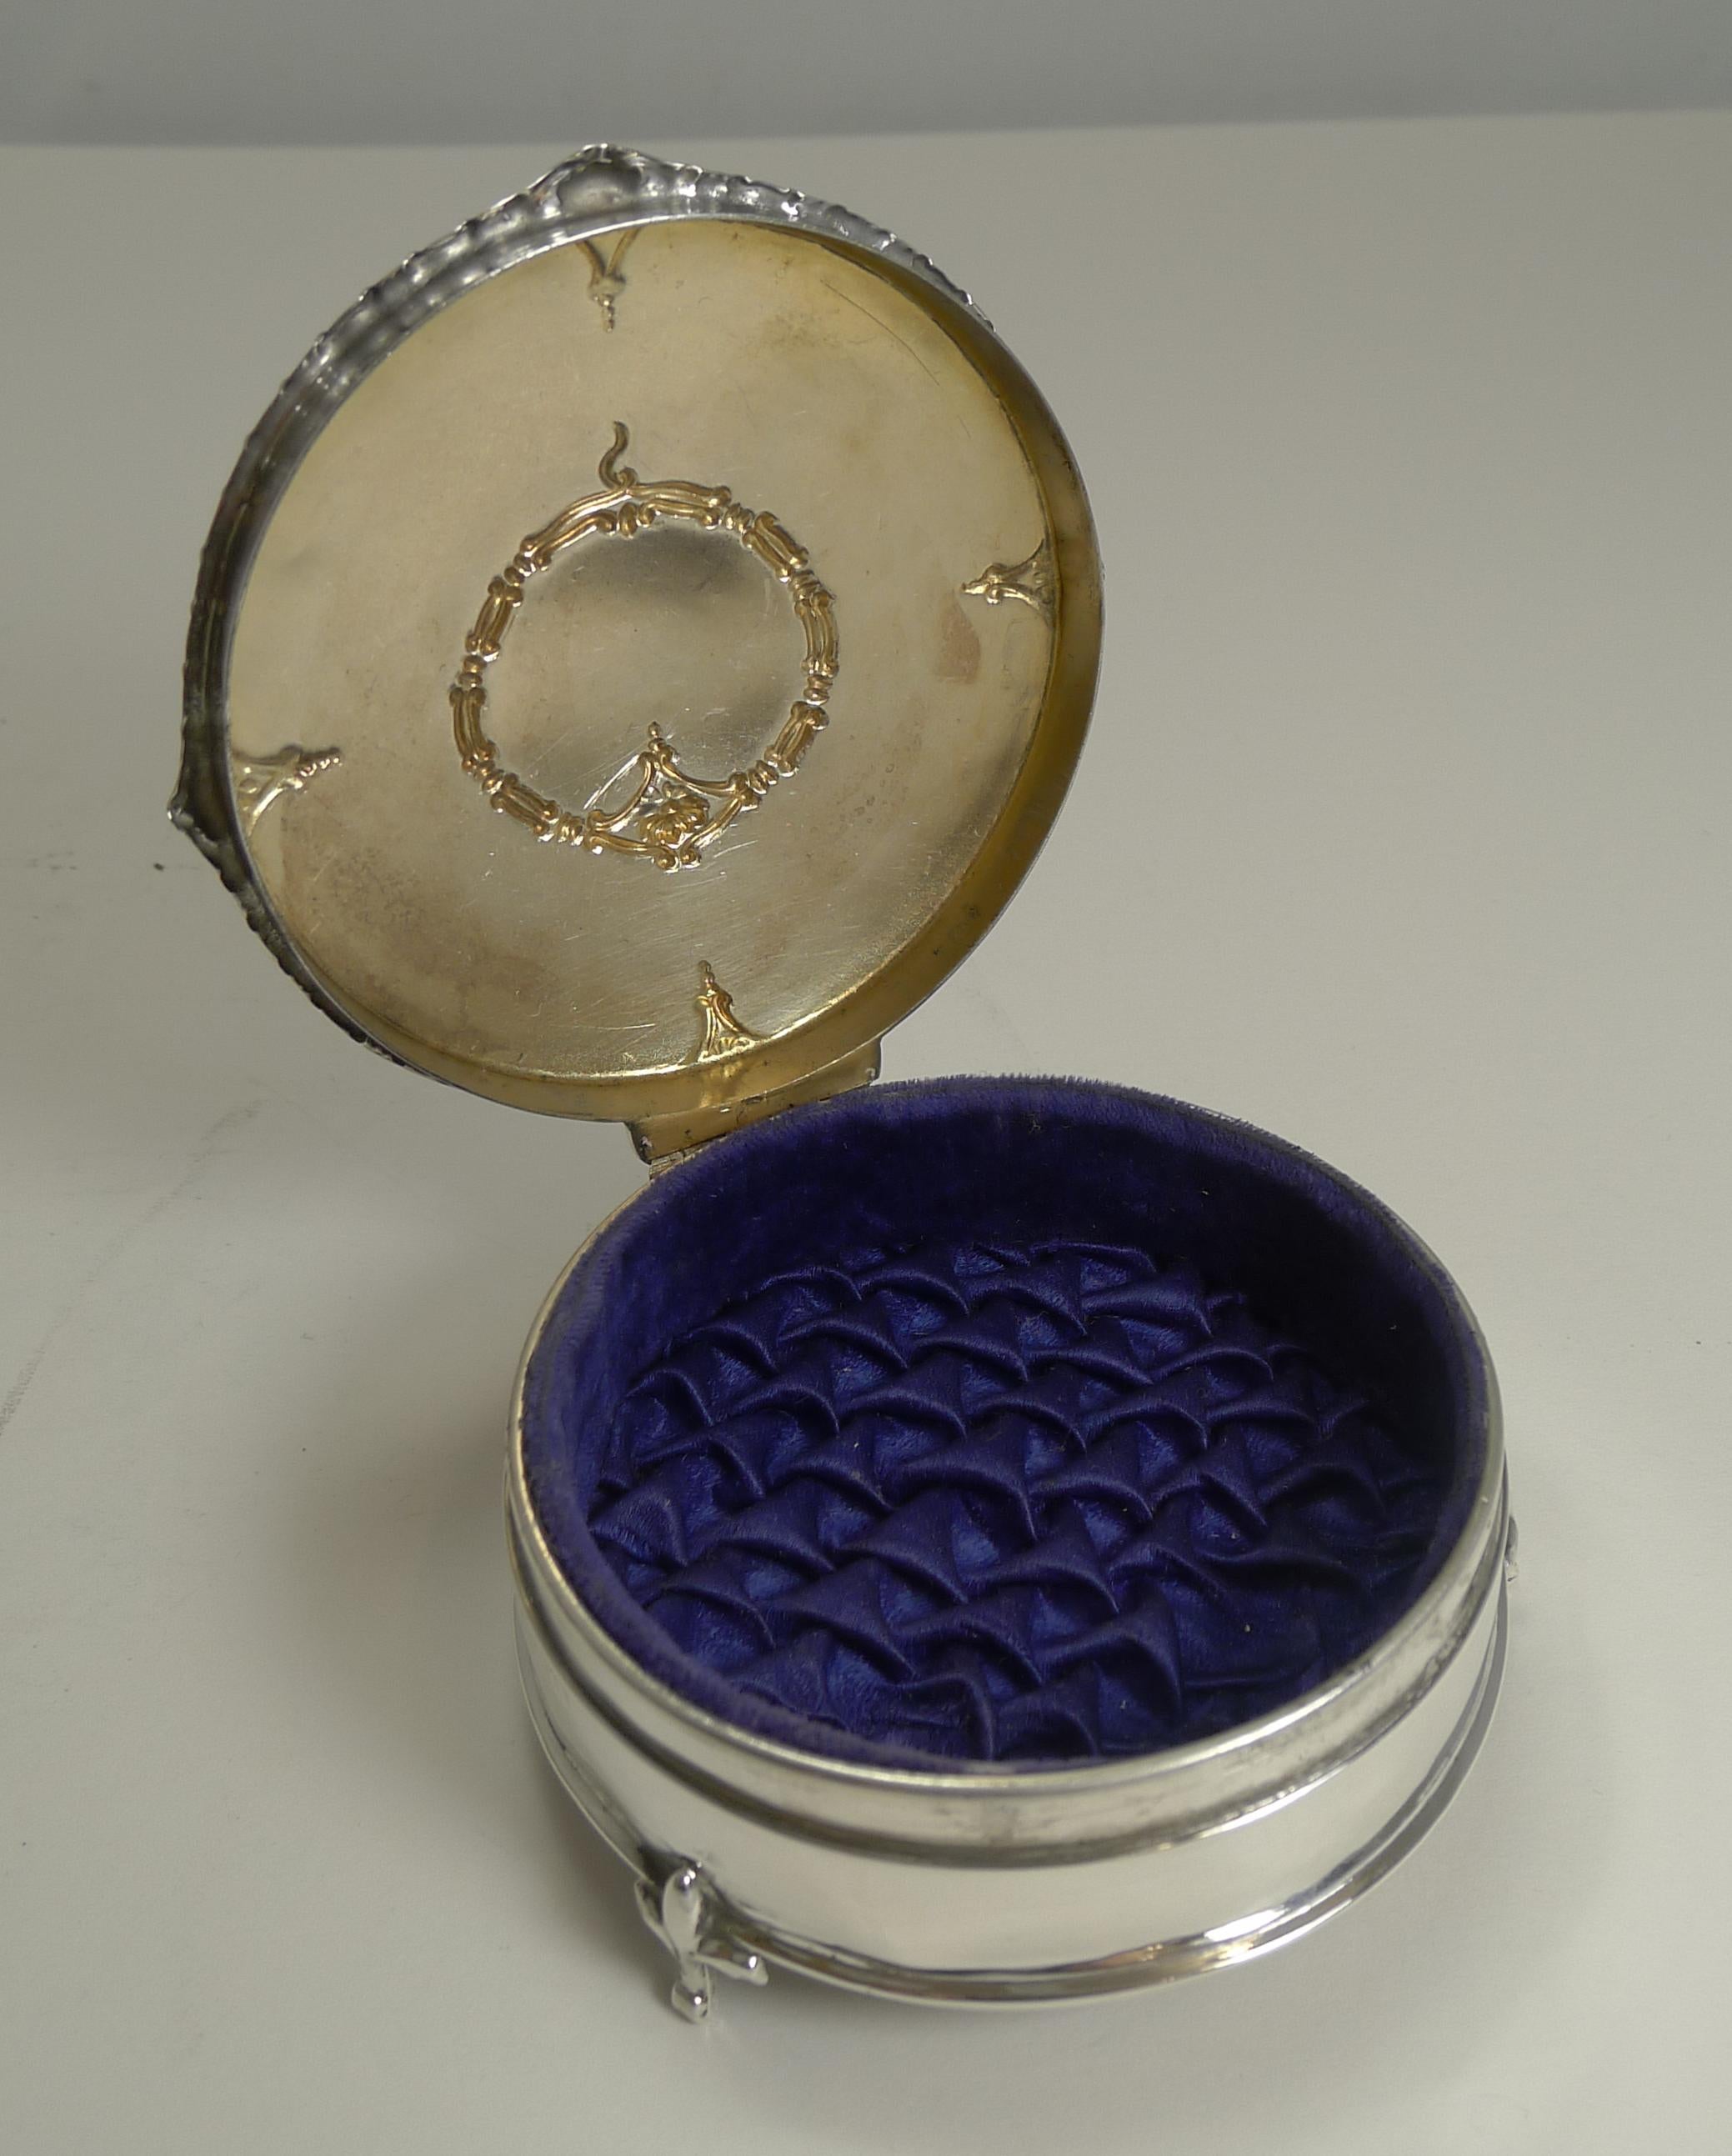 Early 20th Century Antique English Sterling Silver Jewelry / Ring Box, 1917